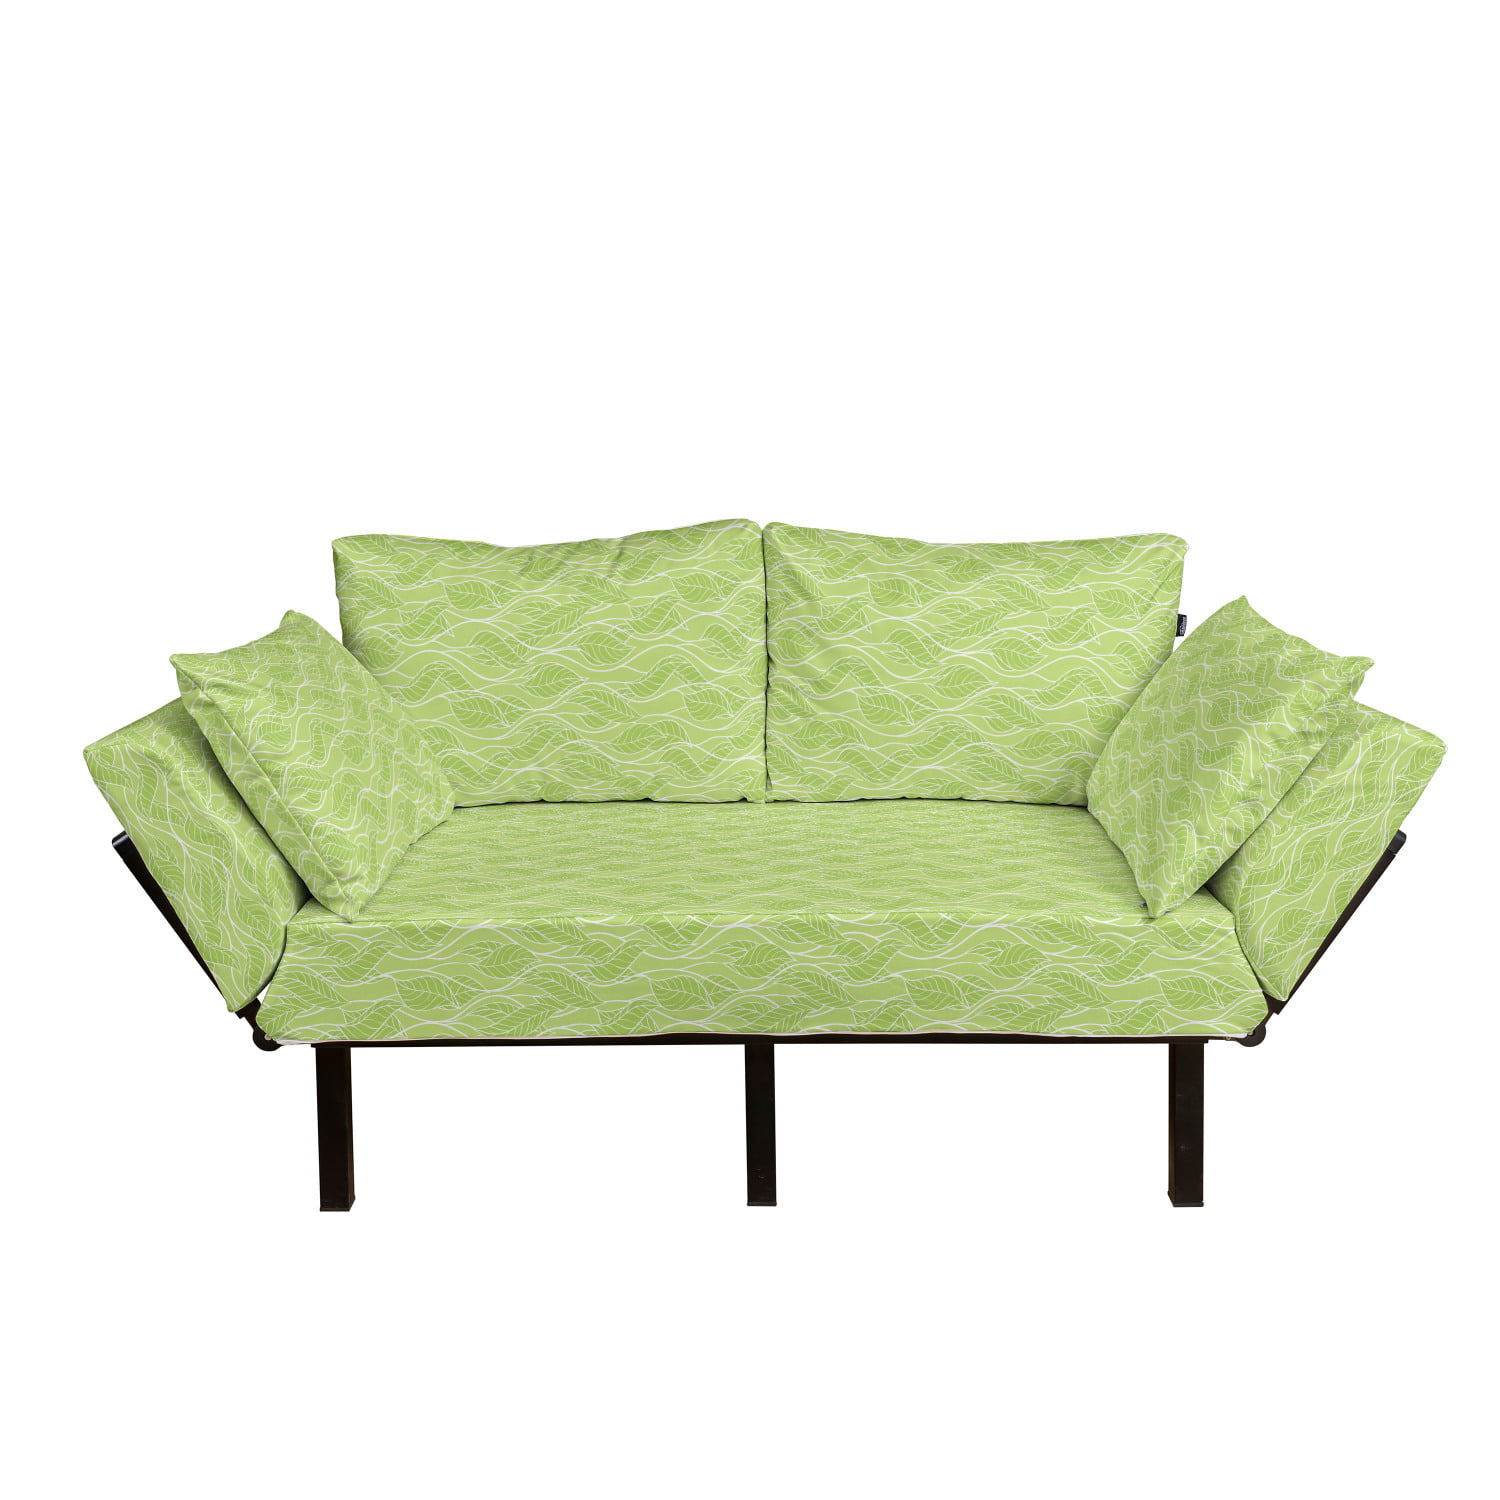 Double Leaf Green Tulip Flower and Simplistic Illustration Ambesonne Kangaroo Futon Couch Almond Green Camel Taupe Daybed with Metal Frame Upholstered Sofa for Living Dorm Loveseat 